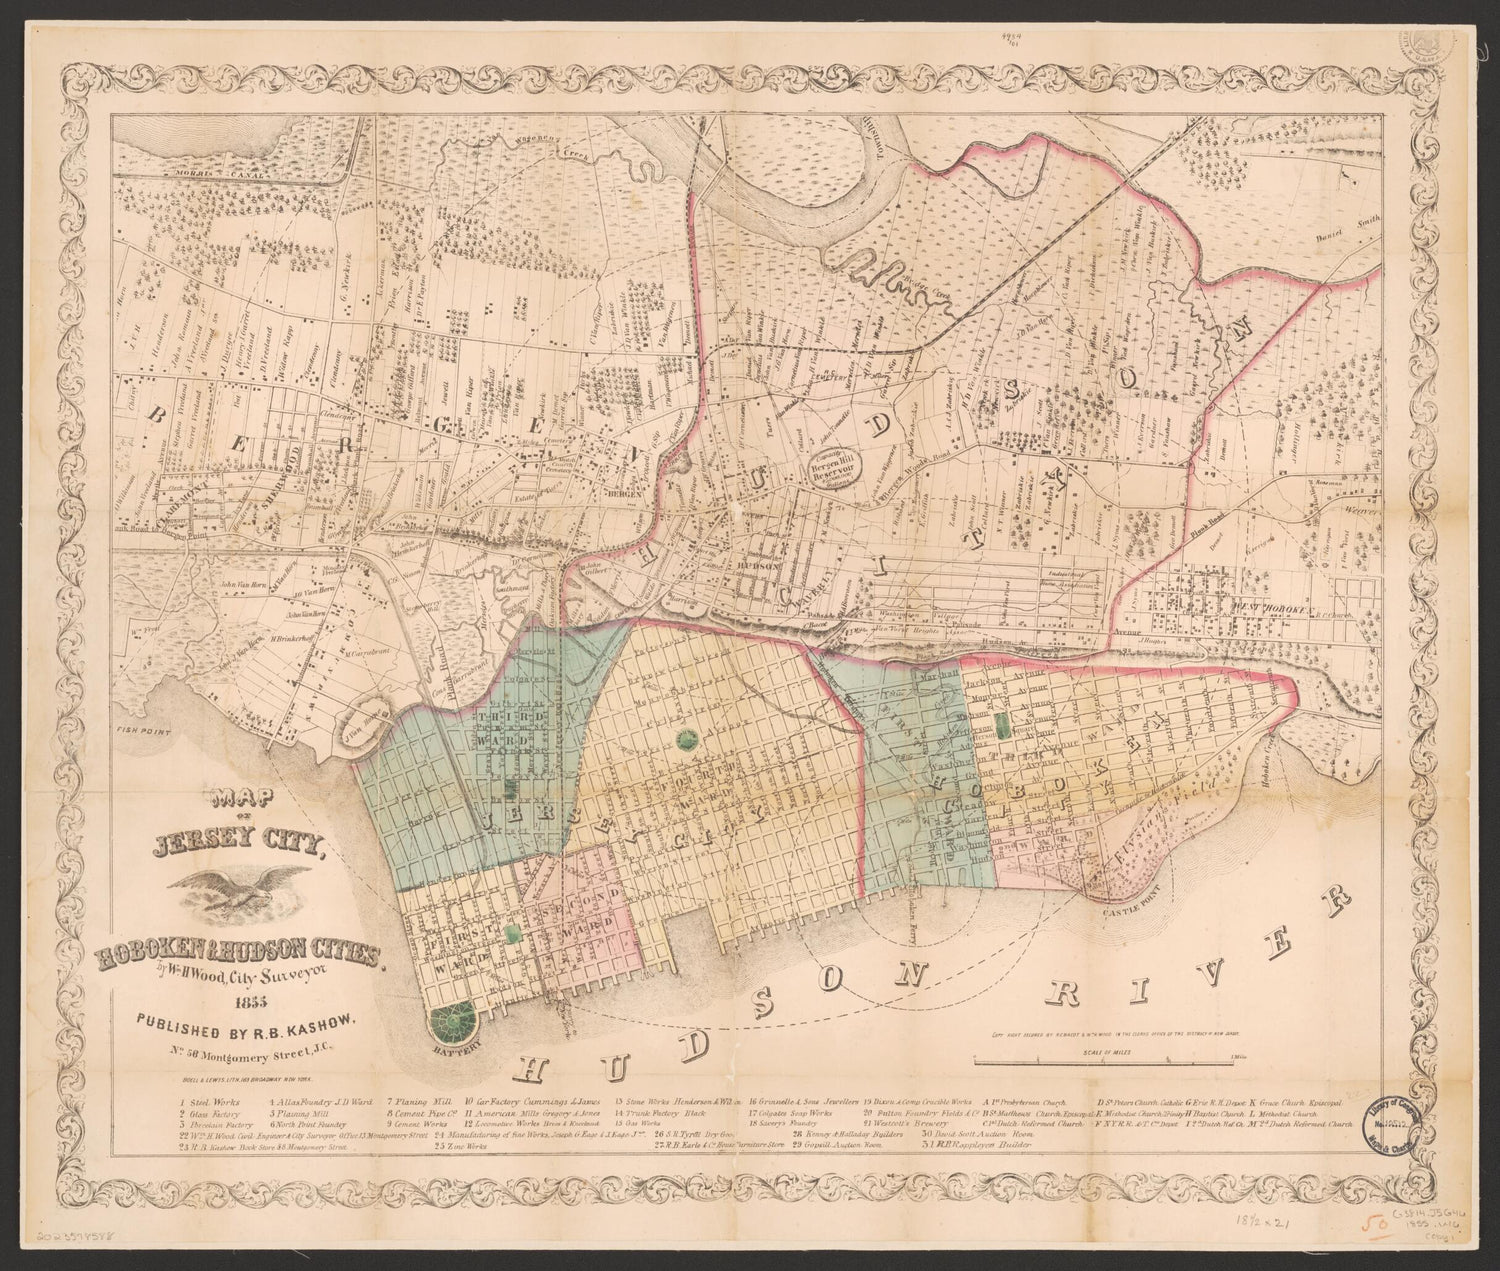 This old map of Map of Jersey City, Hoboken &amp; Hudson Cities (Map of Jersey City, Hoboken and Hudson Cities) from 1855 was created by R.B. Kashow, Wm. H. Wood in 1855